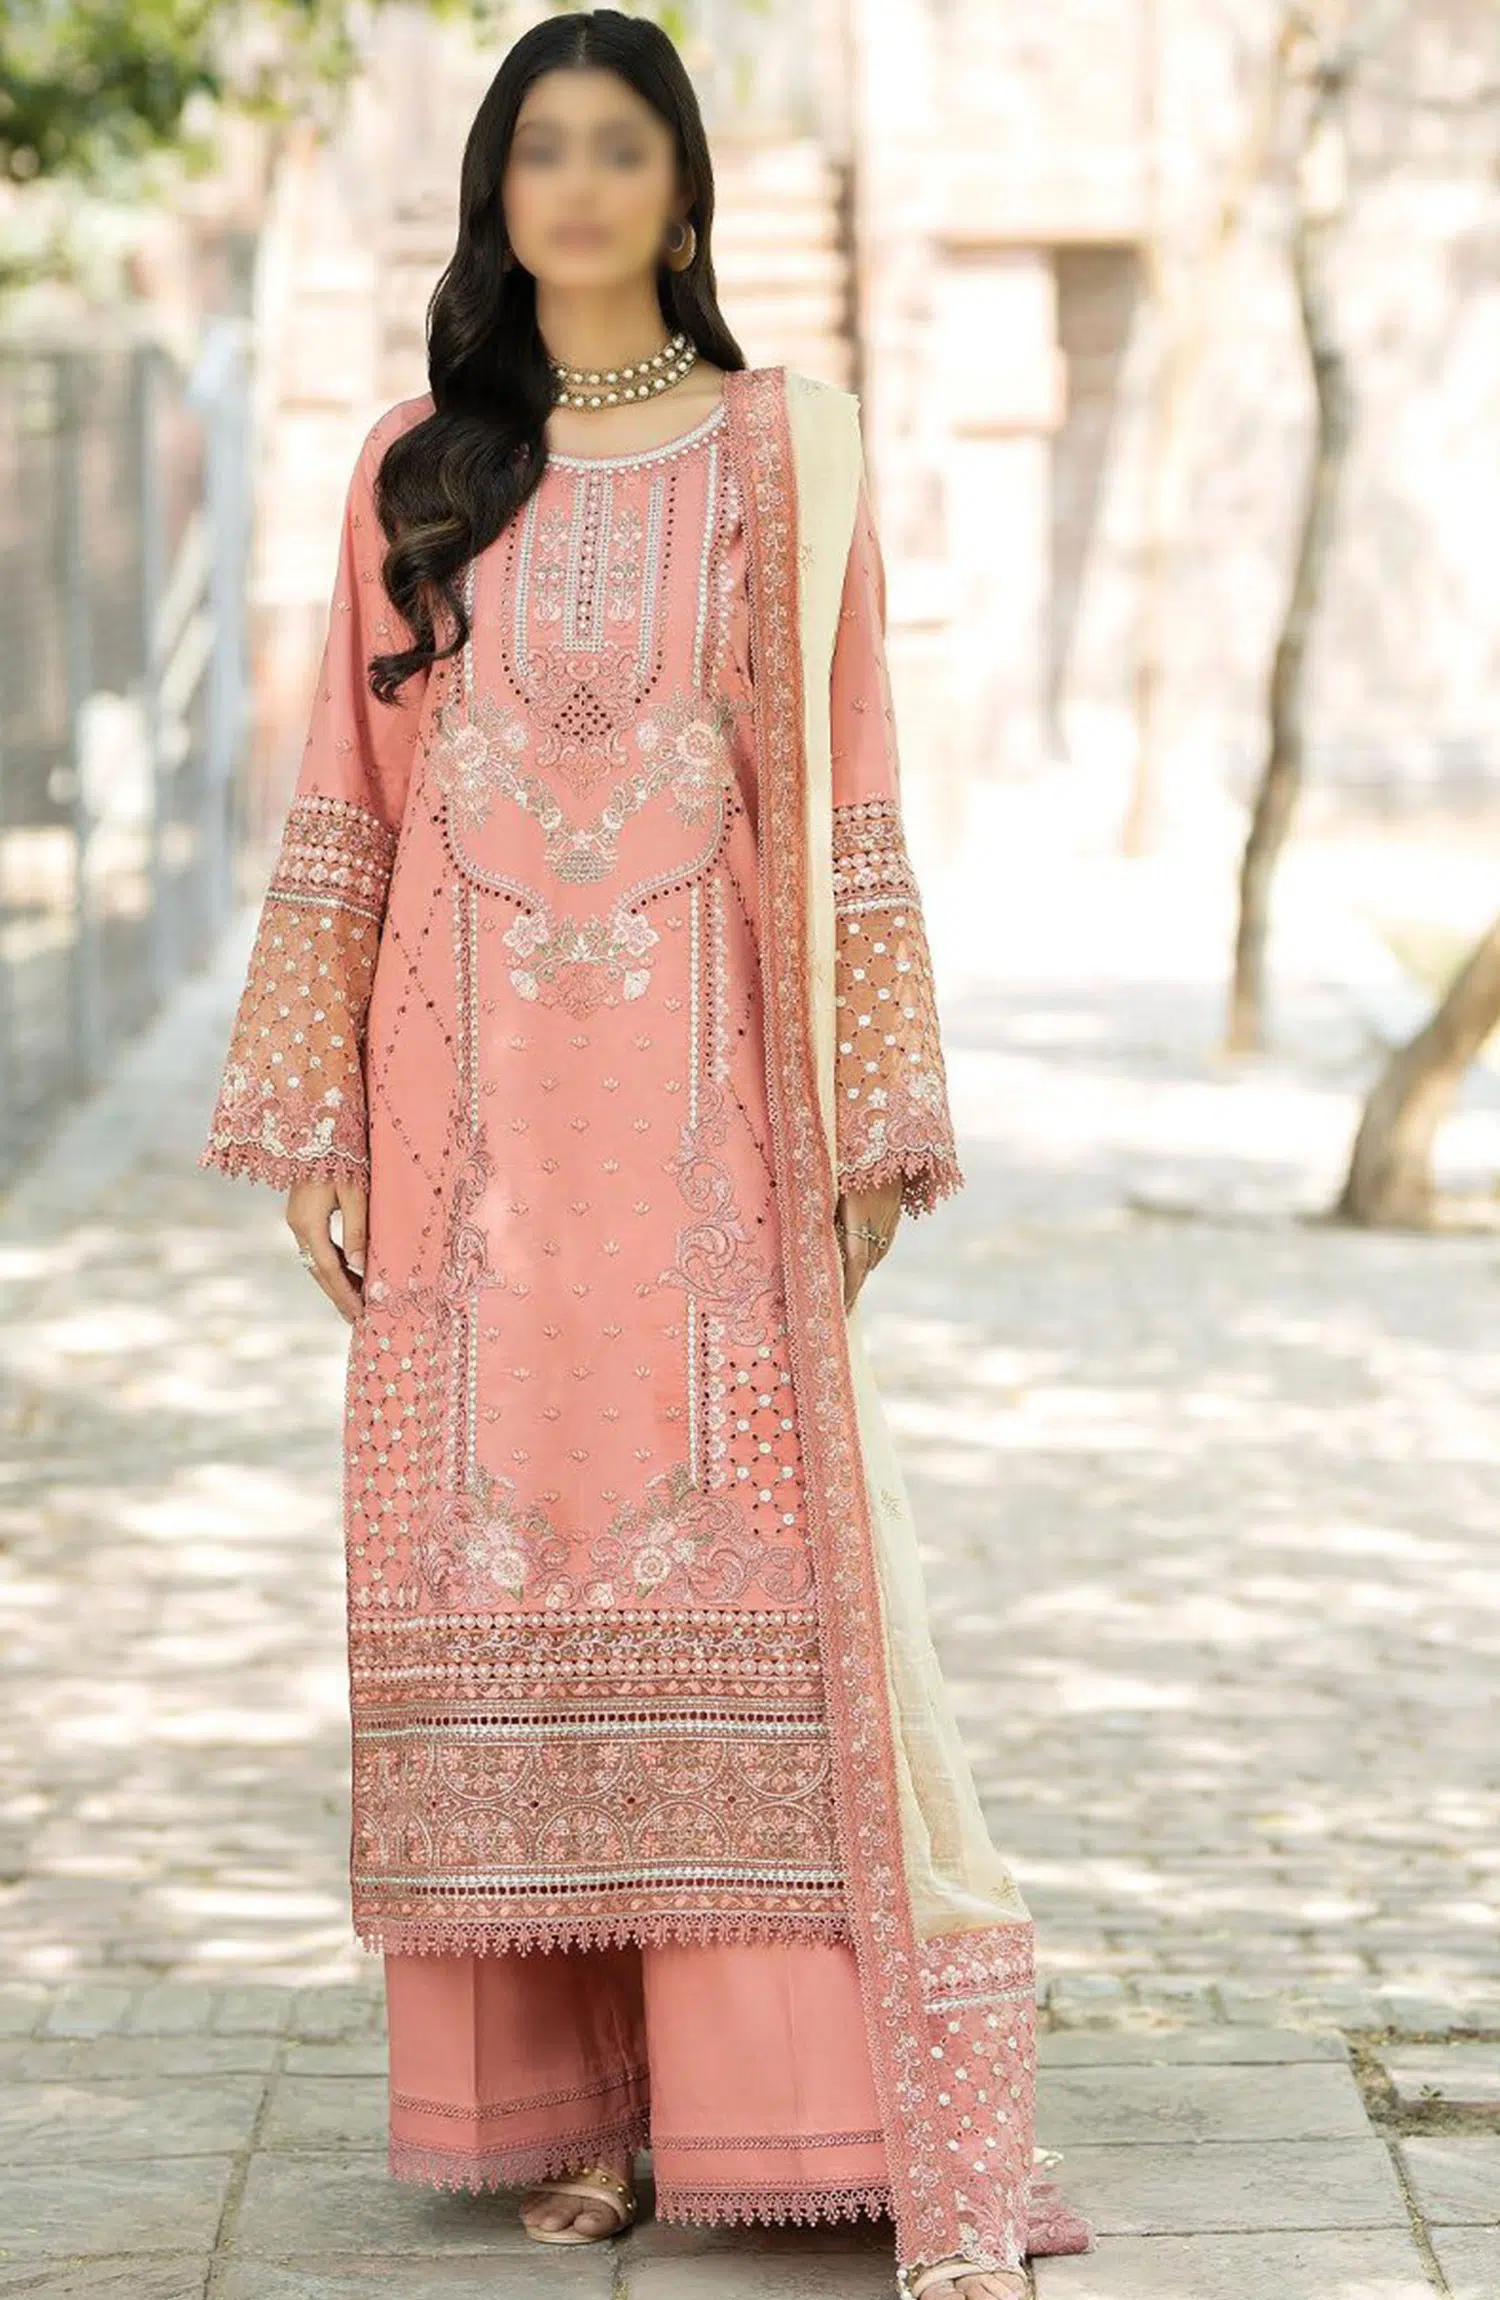 Subah-e-Roshan Luxury Lawn Collection by Serene - SL 70 AAINA